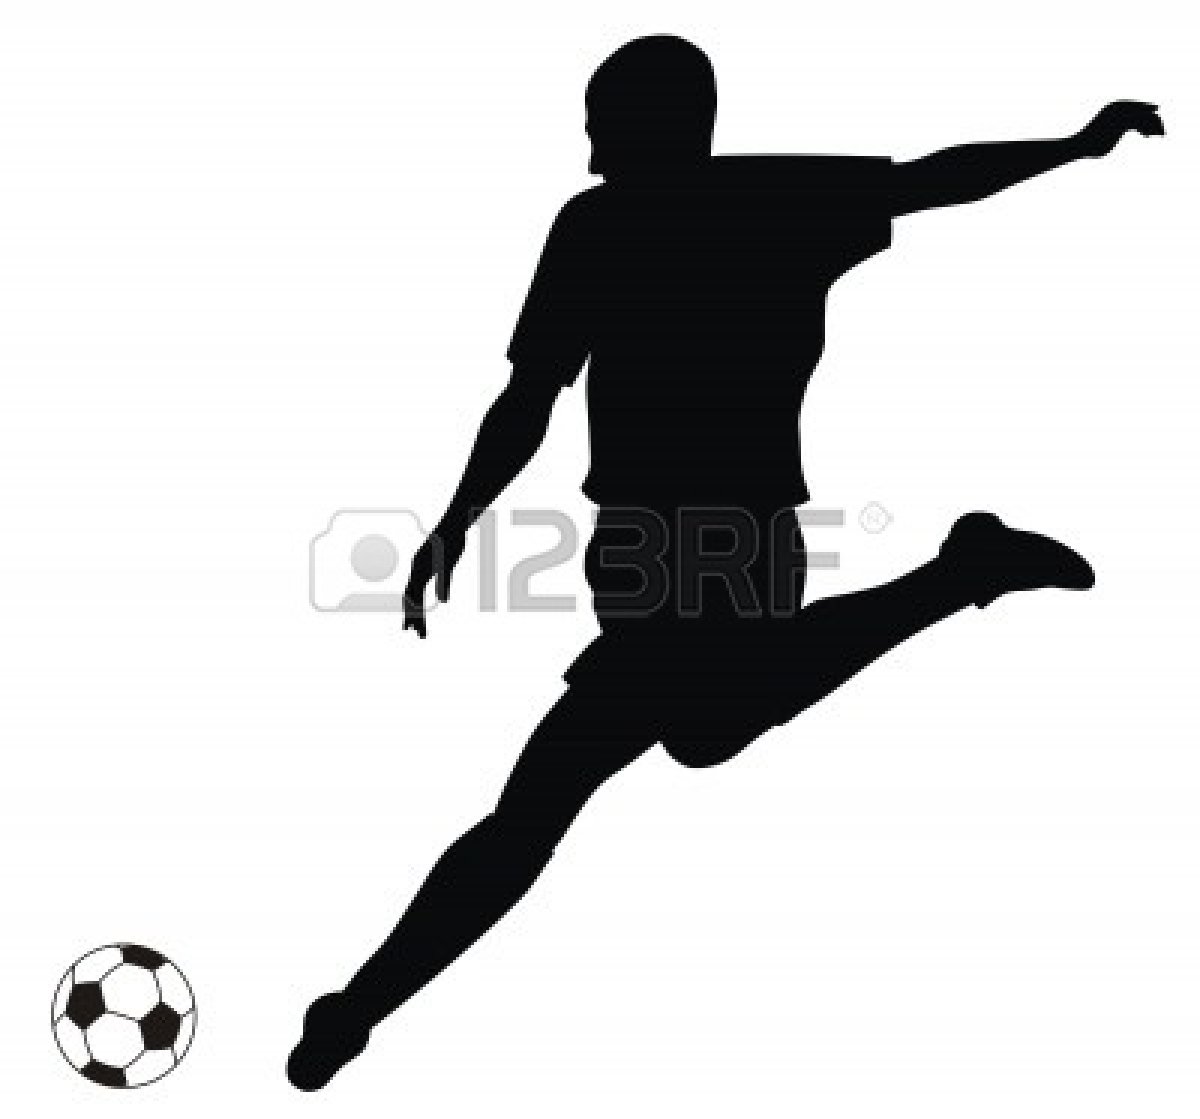 Soccer Player Silhouette   Clipart Panda   Free Clipart Images